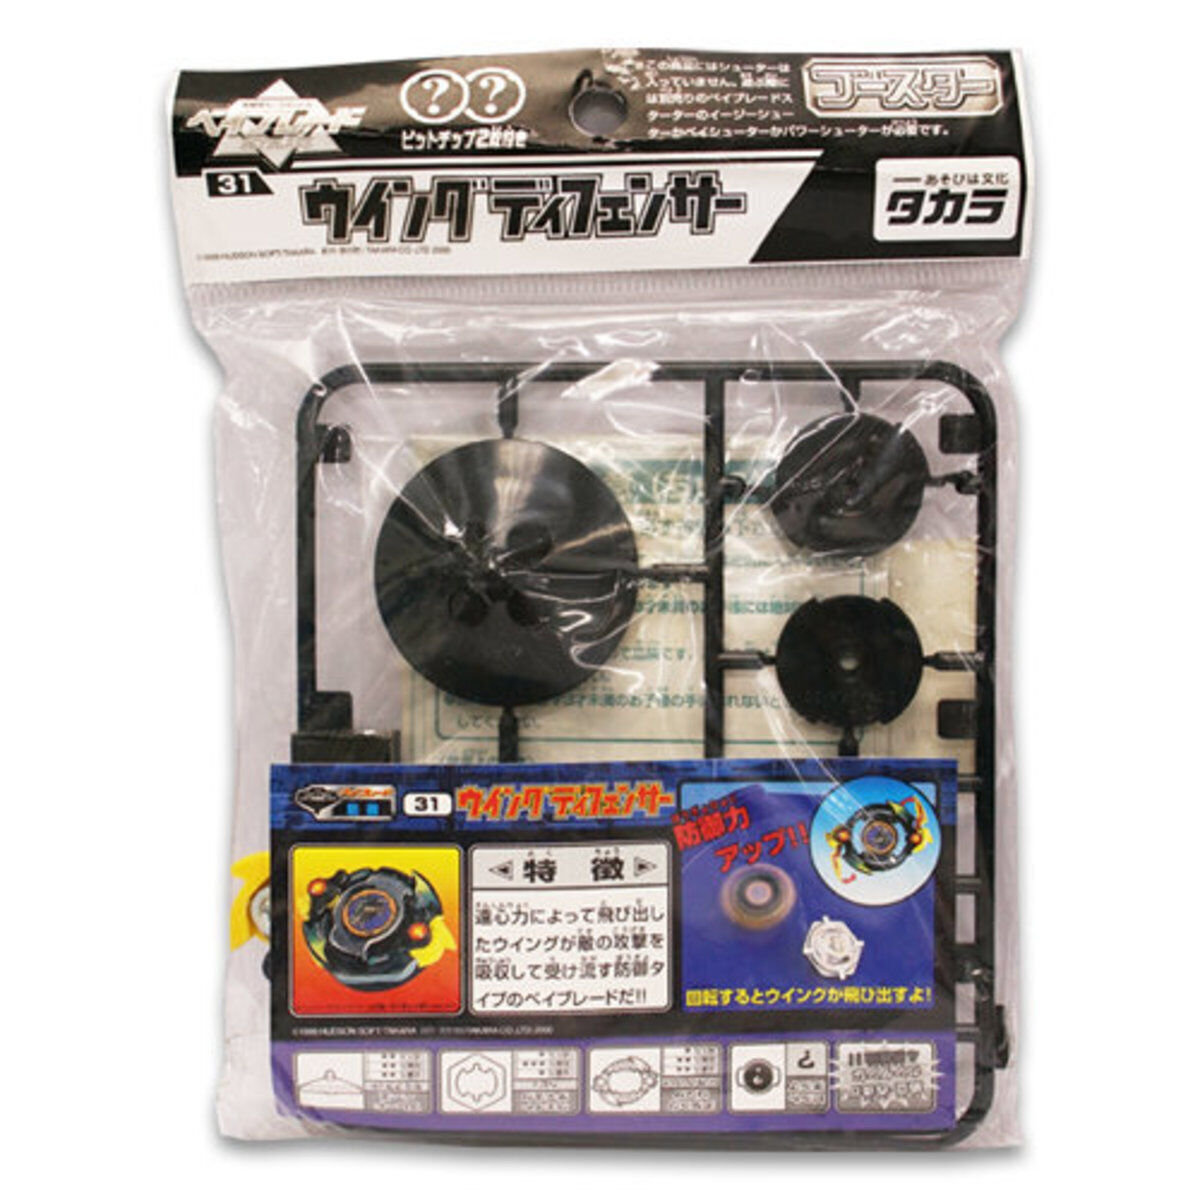 Takara Beyblade - BEYBLADE-31 WING DEFENCER-shooter not included